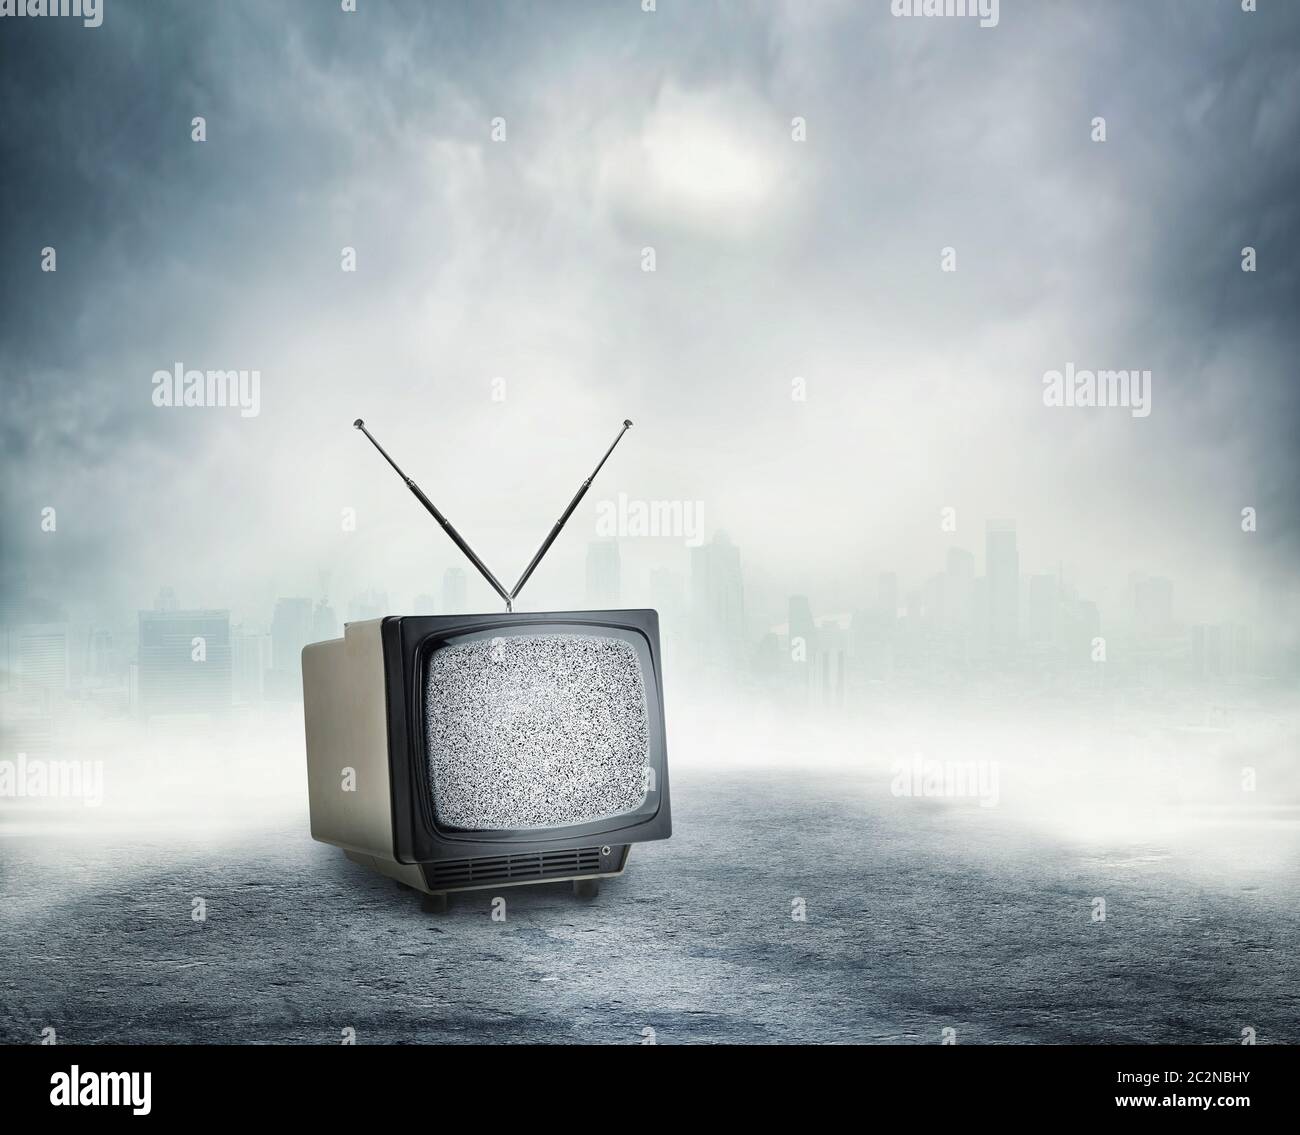 Old TV set in abstract surround Stock Photo